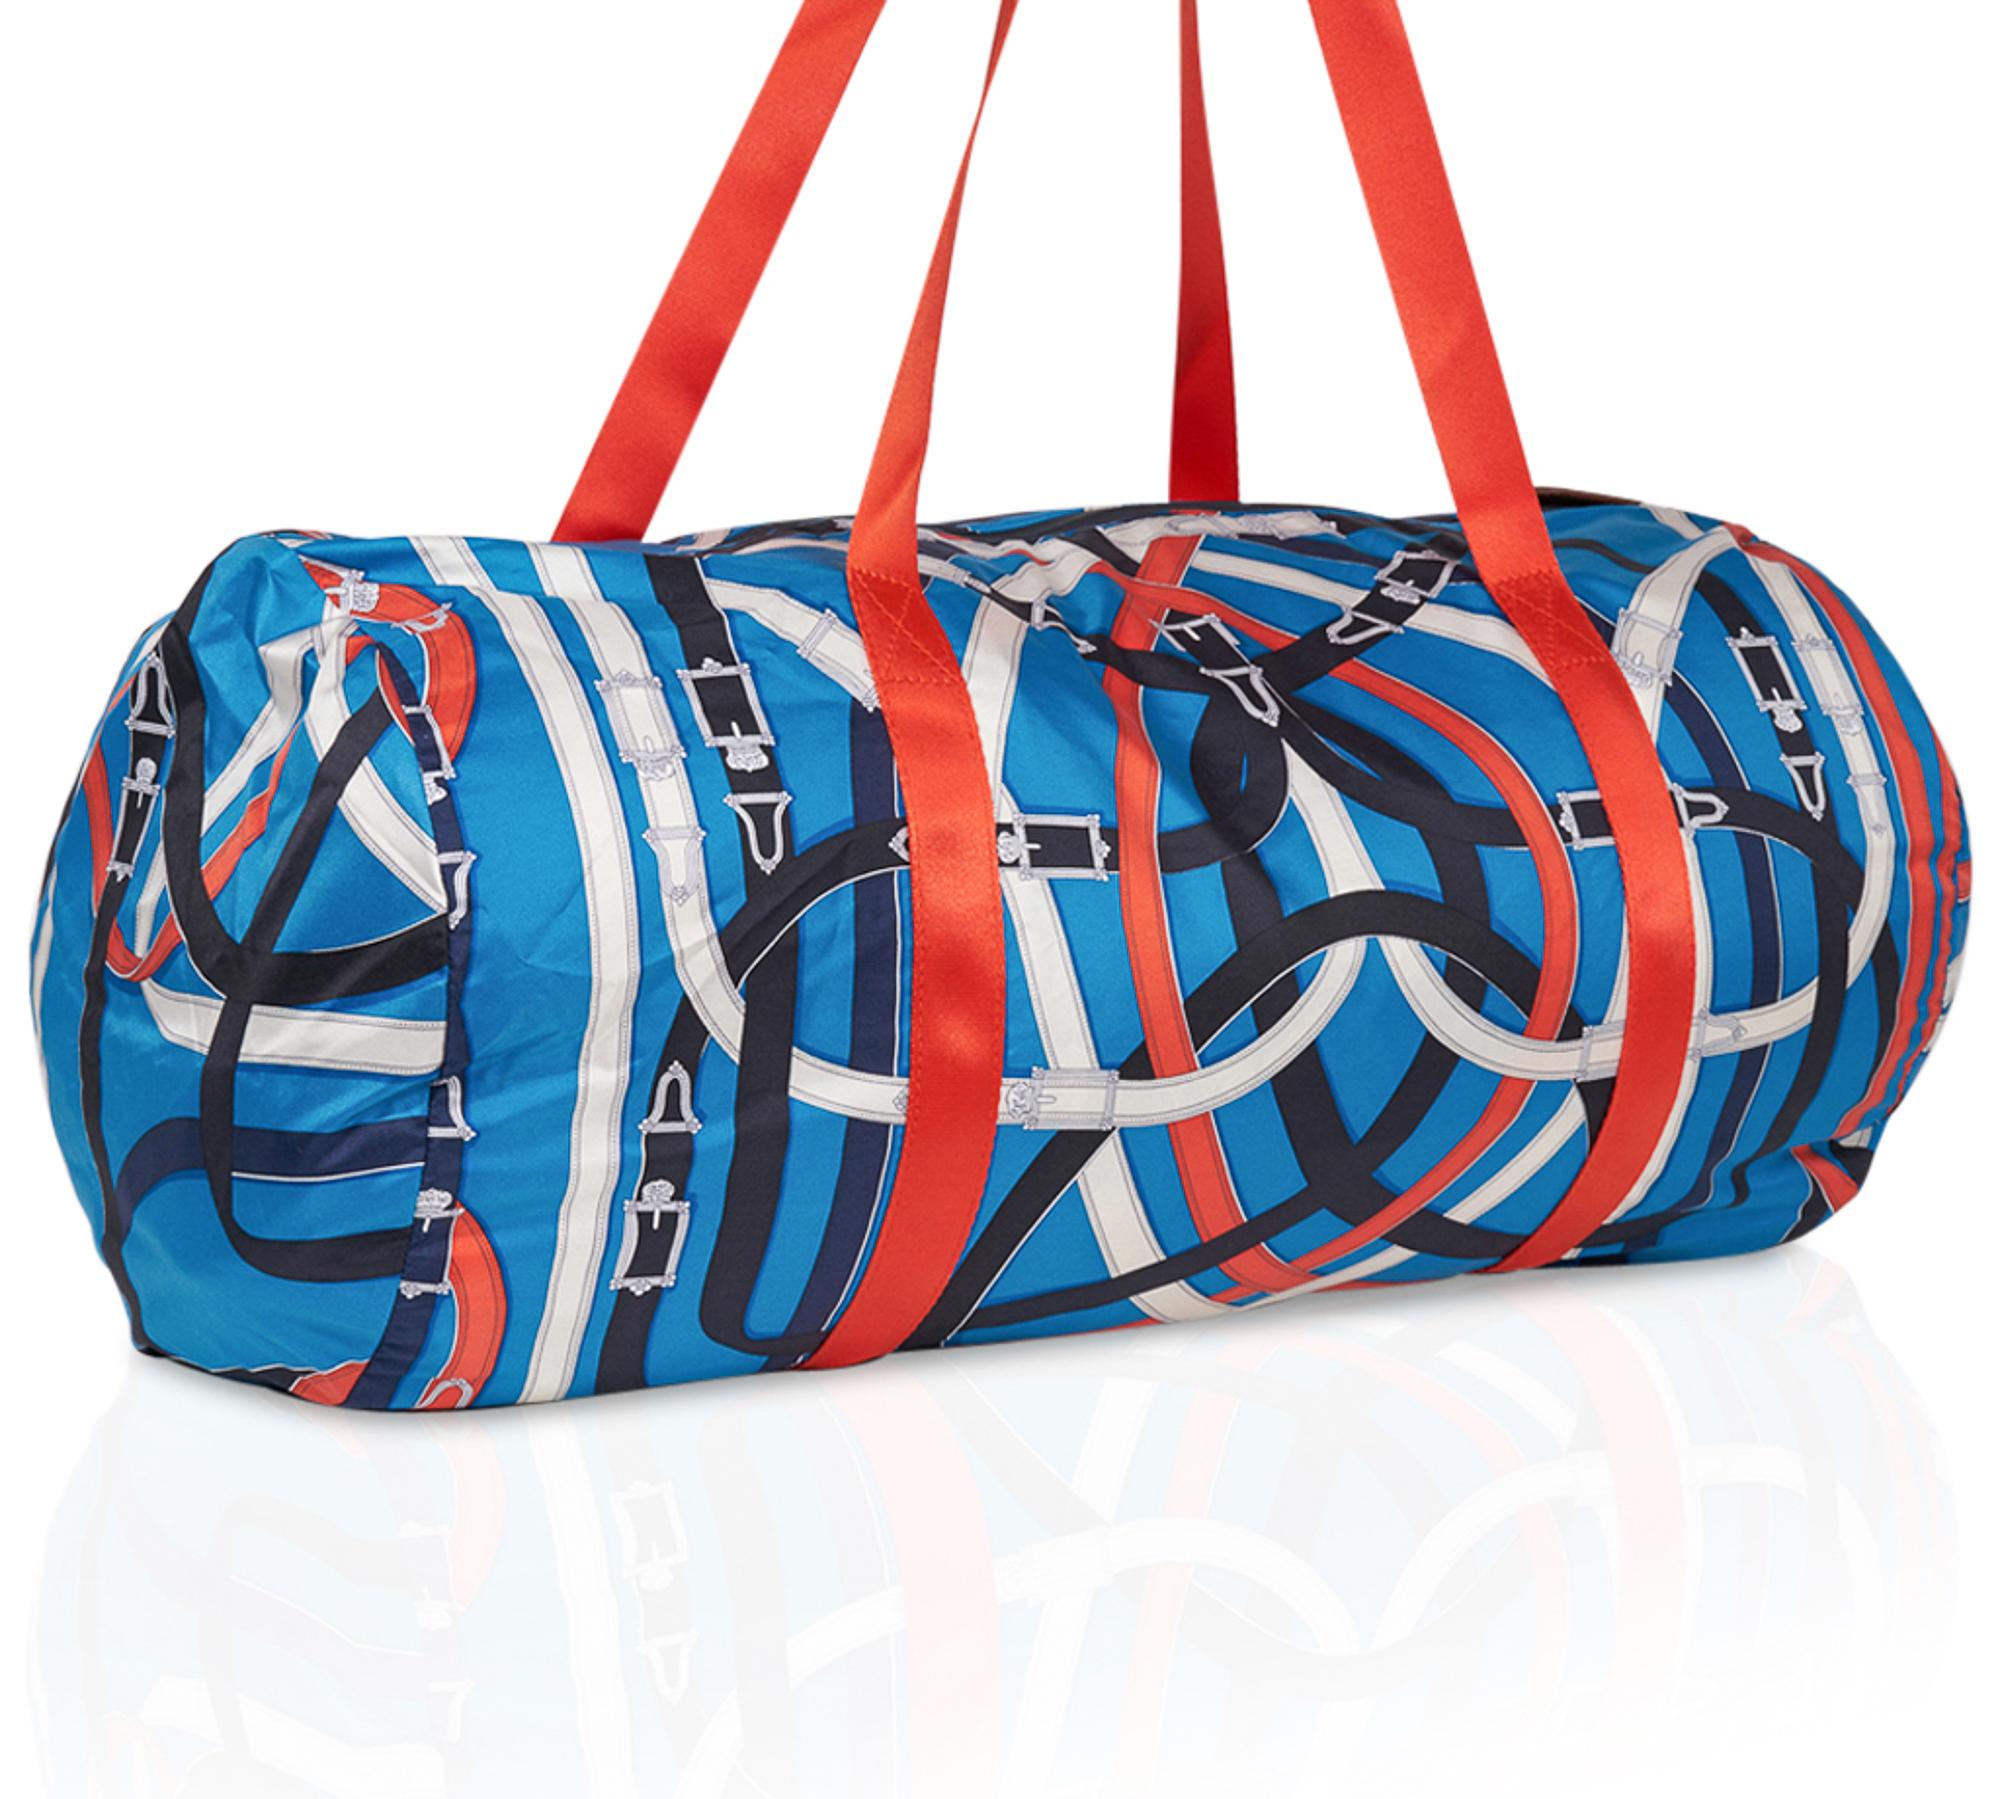 Guaranteed authentic limited edition Hermes Airsilk Duffle Cavalcadour 44 bag featured in Blue, Orange, White and Black.
Beautiful Cavalcadour silk scarf print designed by Henri d'Origny.
The perfect elegant top zip weekend / gym bag. 
Palladium